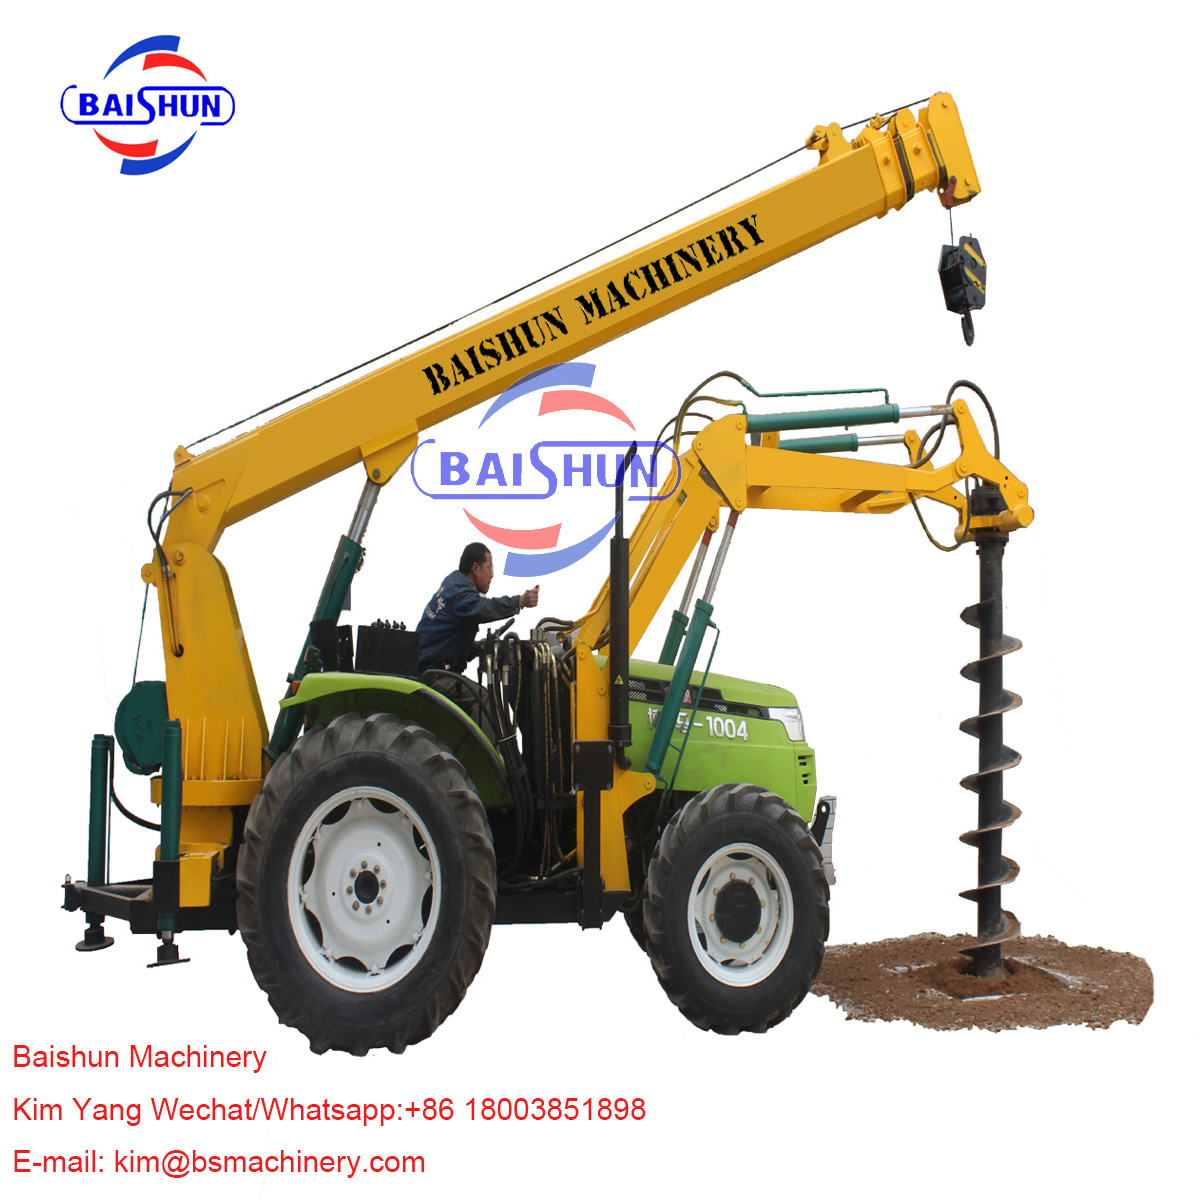  Tractor Crane Pole Erection Machine For Power Transmission 100-2000MM Manufactures